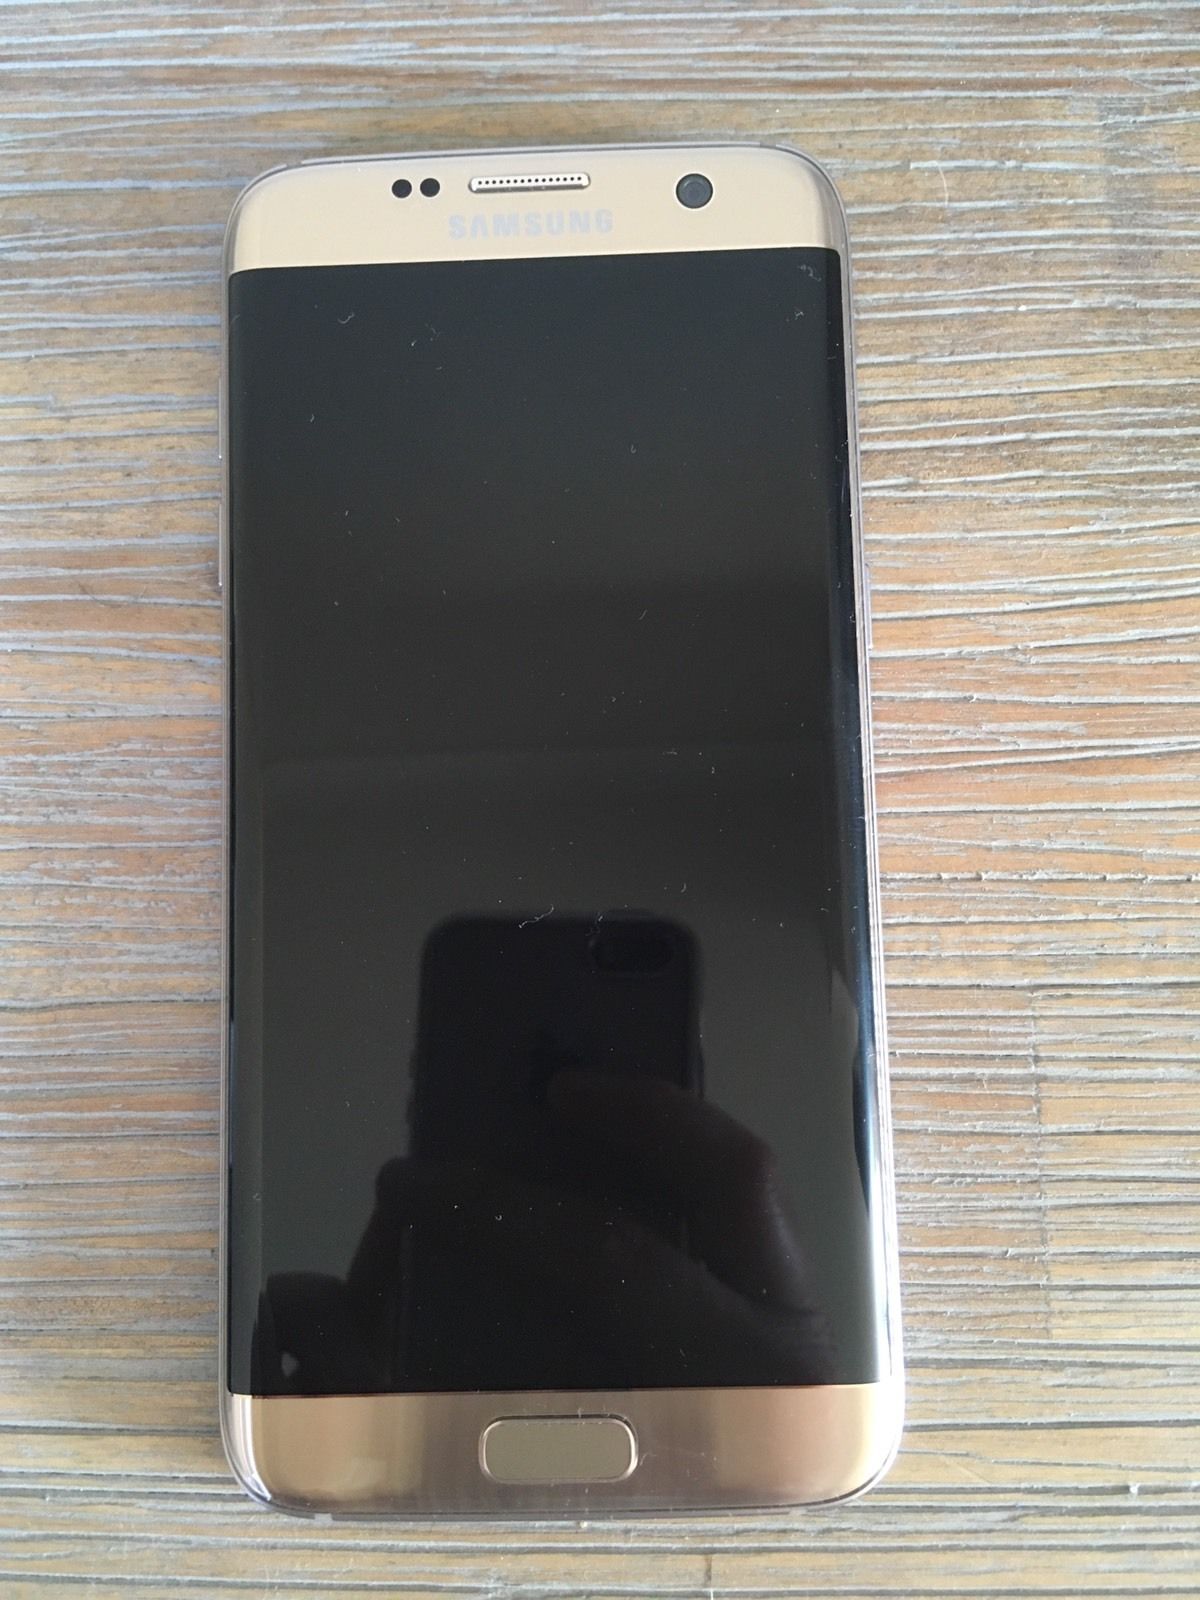 SAMSUNG GALAXY S7 EDGE GOLD SMARTPHONE FOR VERY CHEAP PRICE!'s Logo